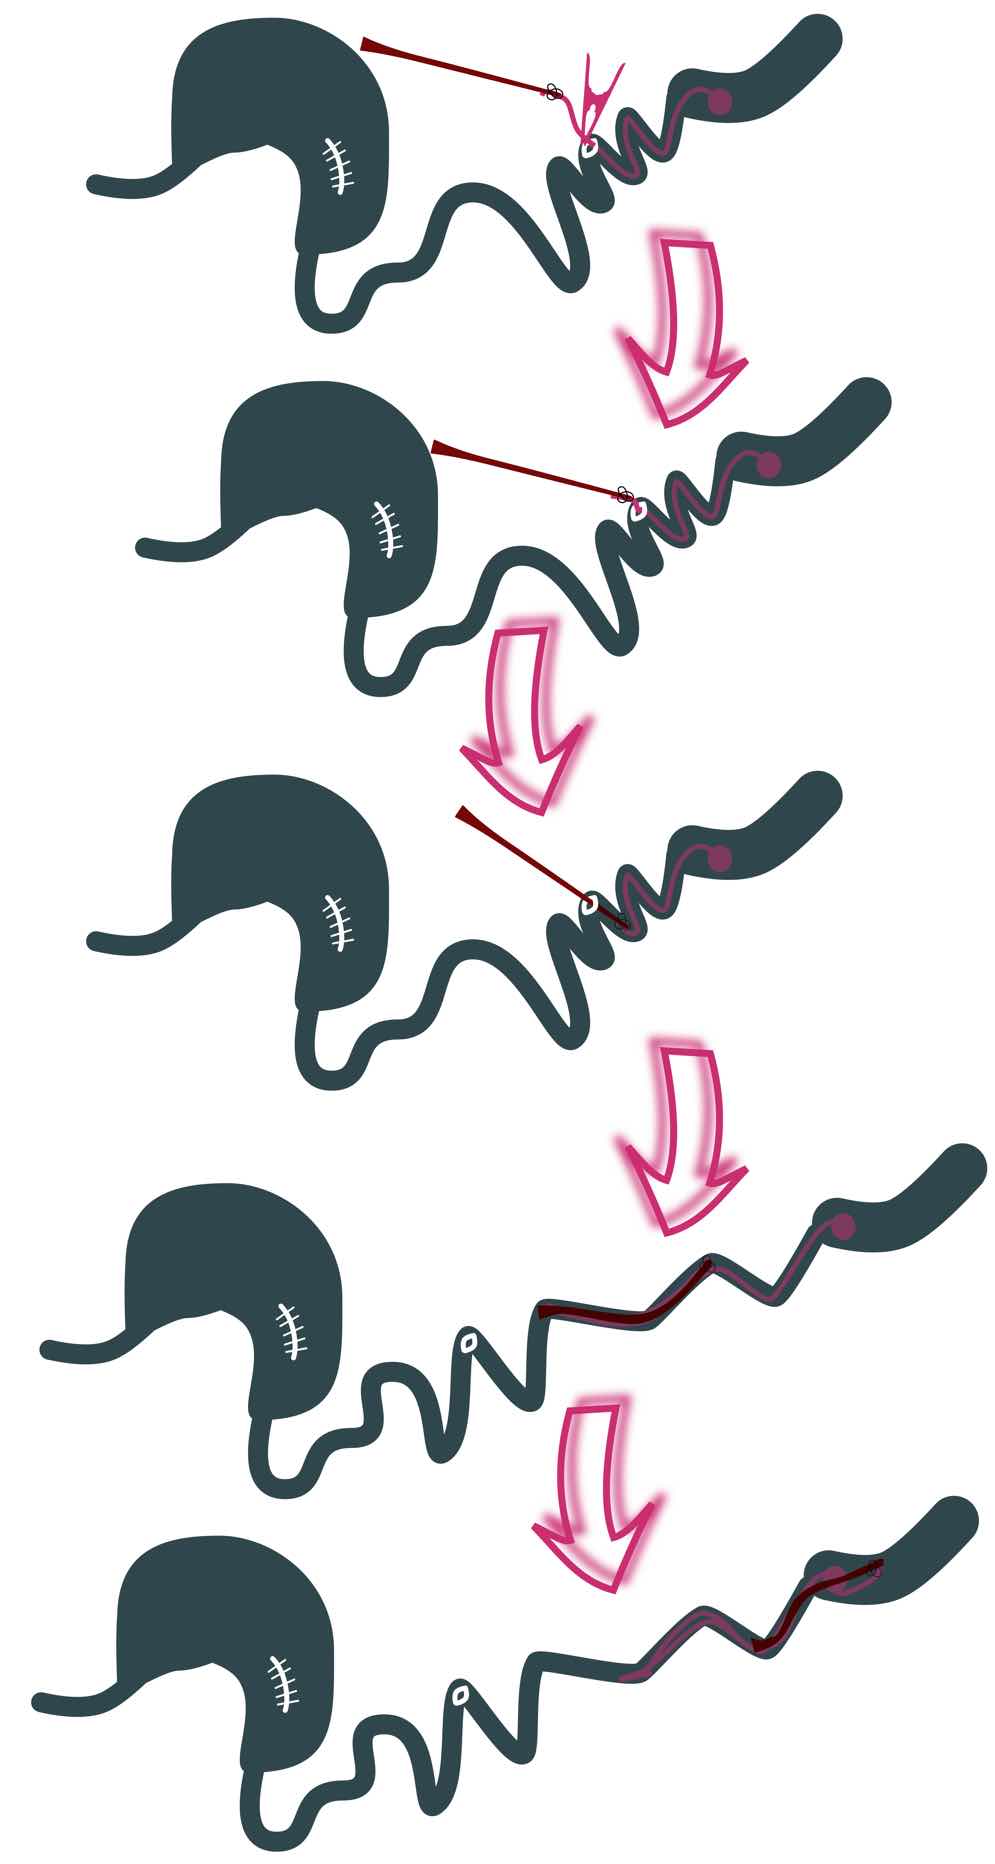 Pictograph of attaching red rubber feeding tube